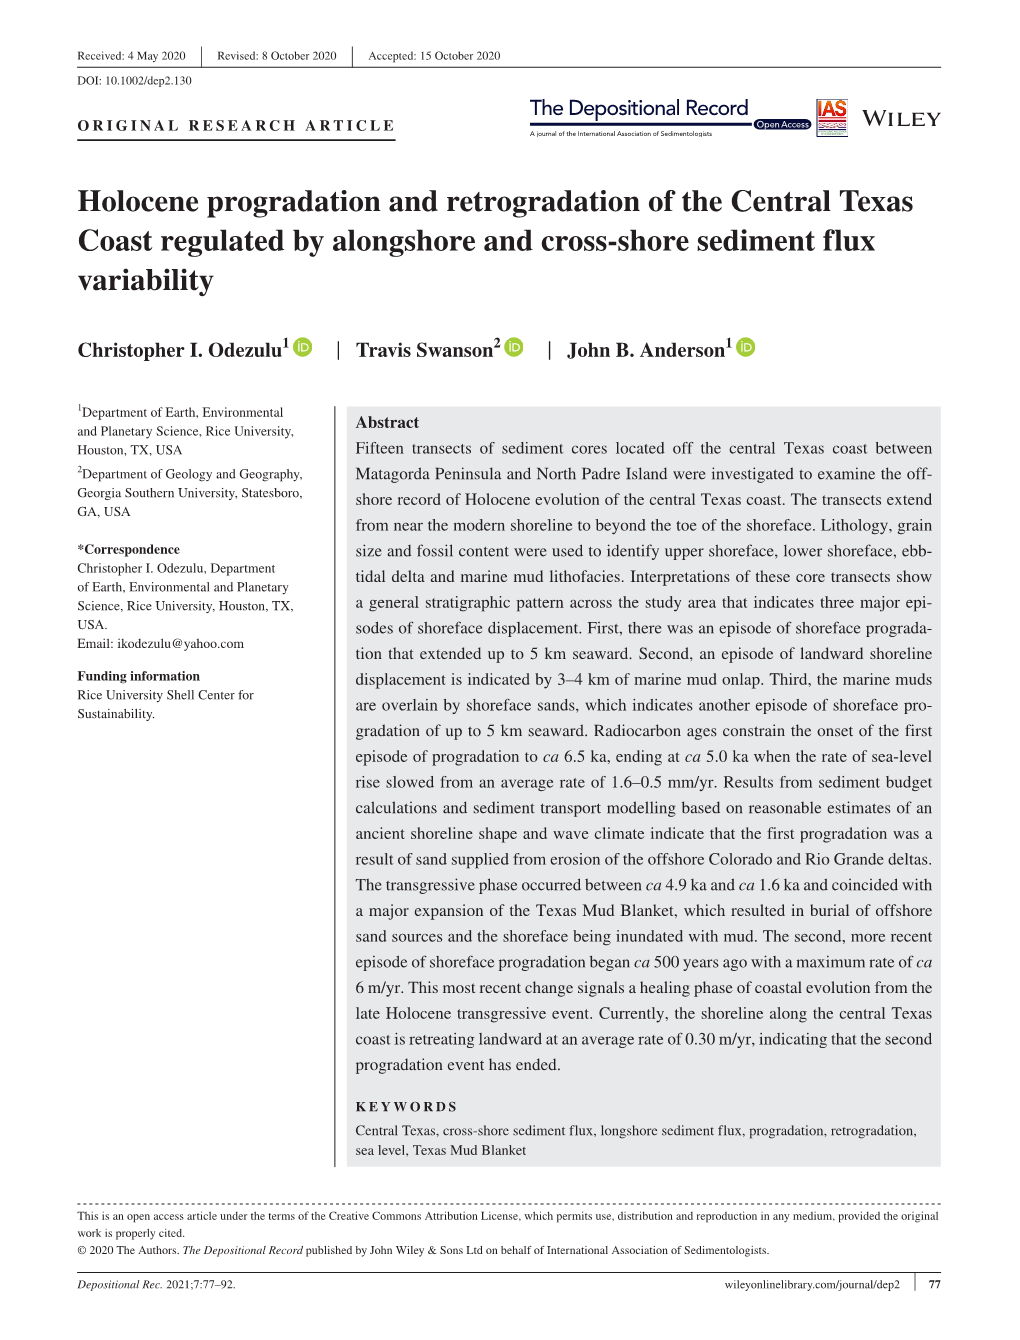 Holocene Progradation and Retrogradation of the Central Texas Coast Regulated by Alongshore and Cross-Shore Sediment Flux Variability